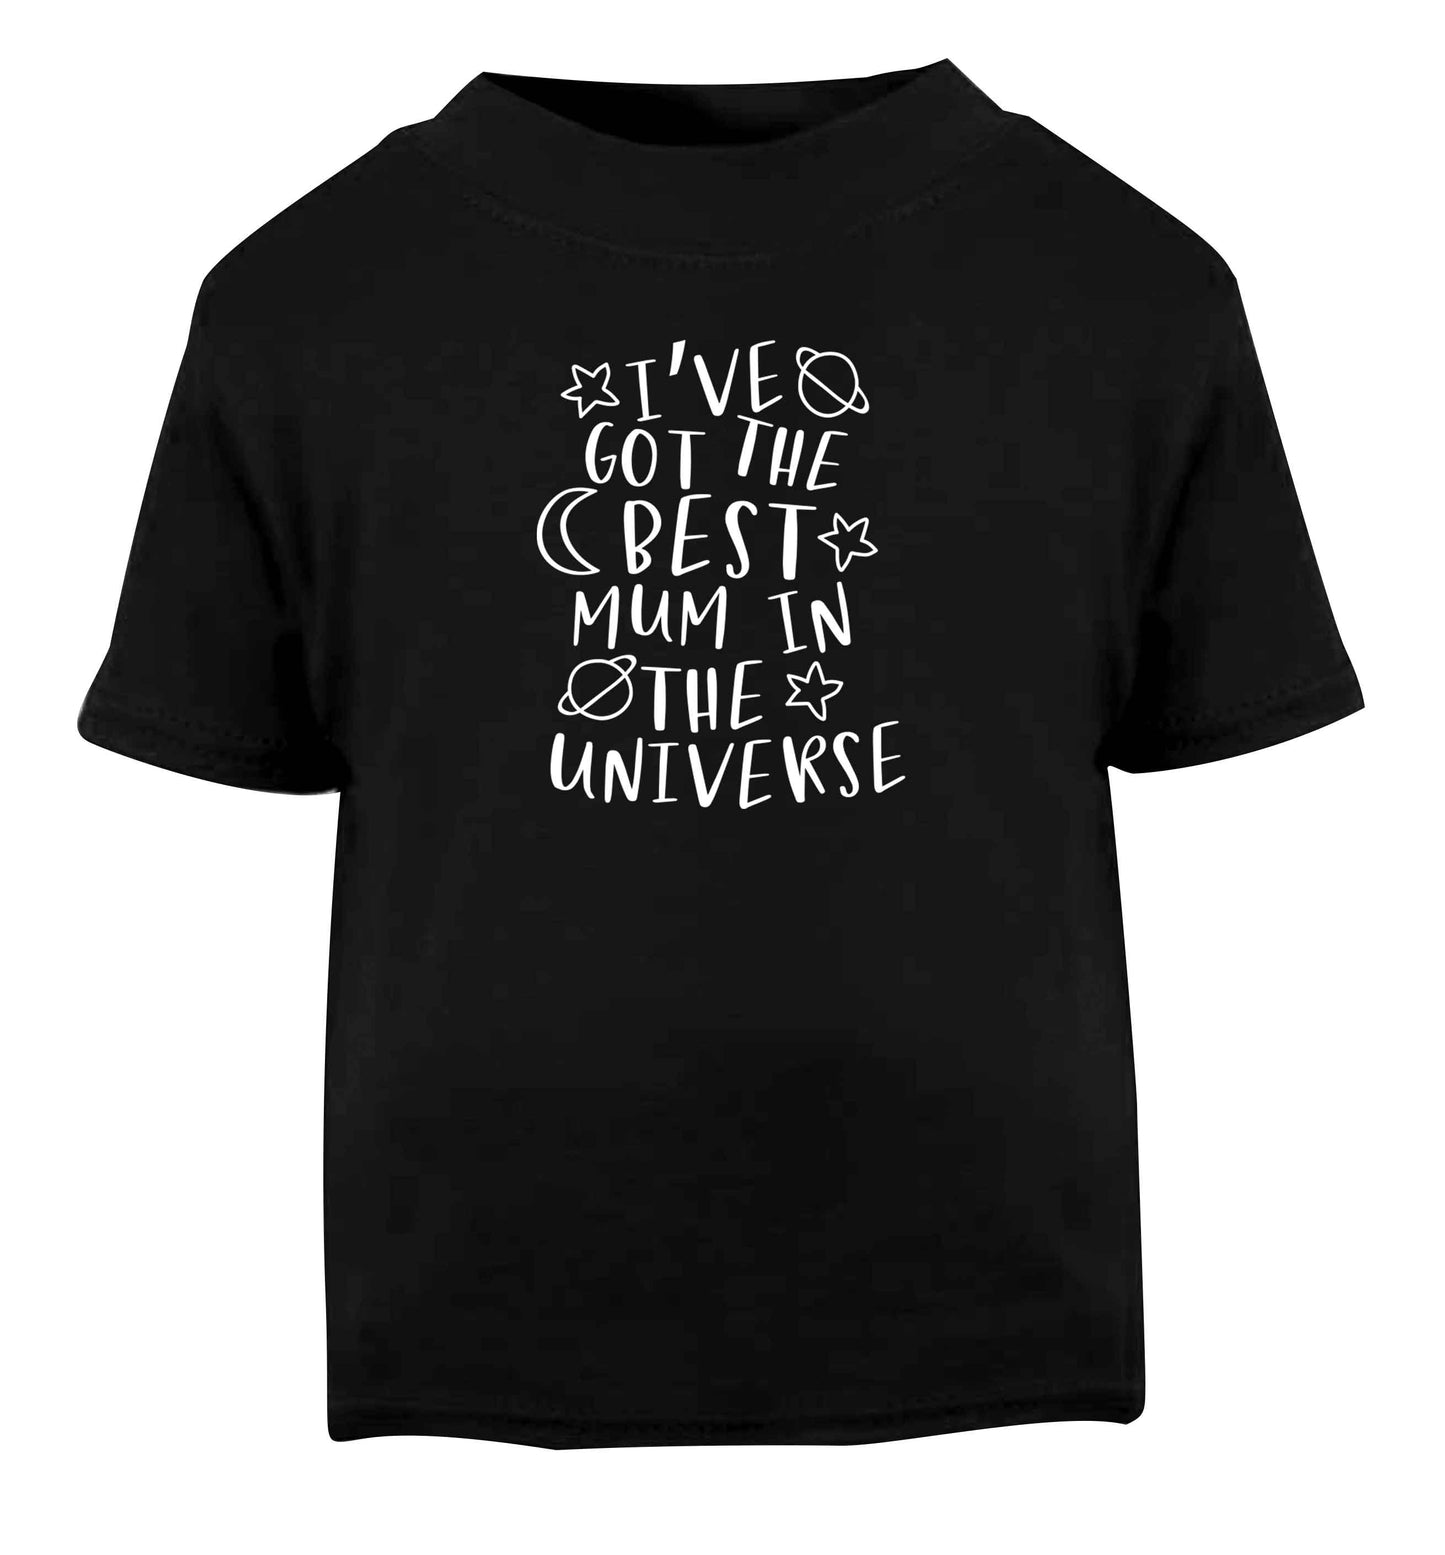 I've got the best mum in the universe Black baby toddler Tshirt 2 years